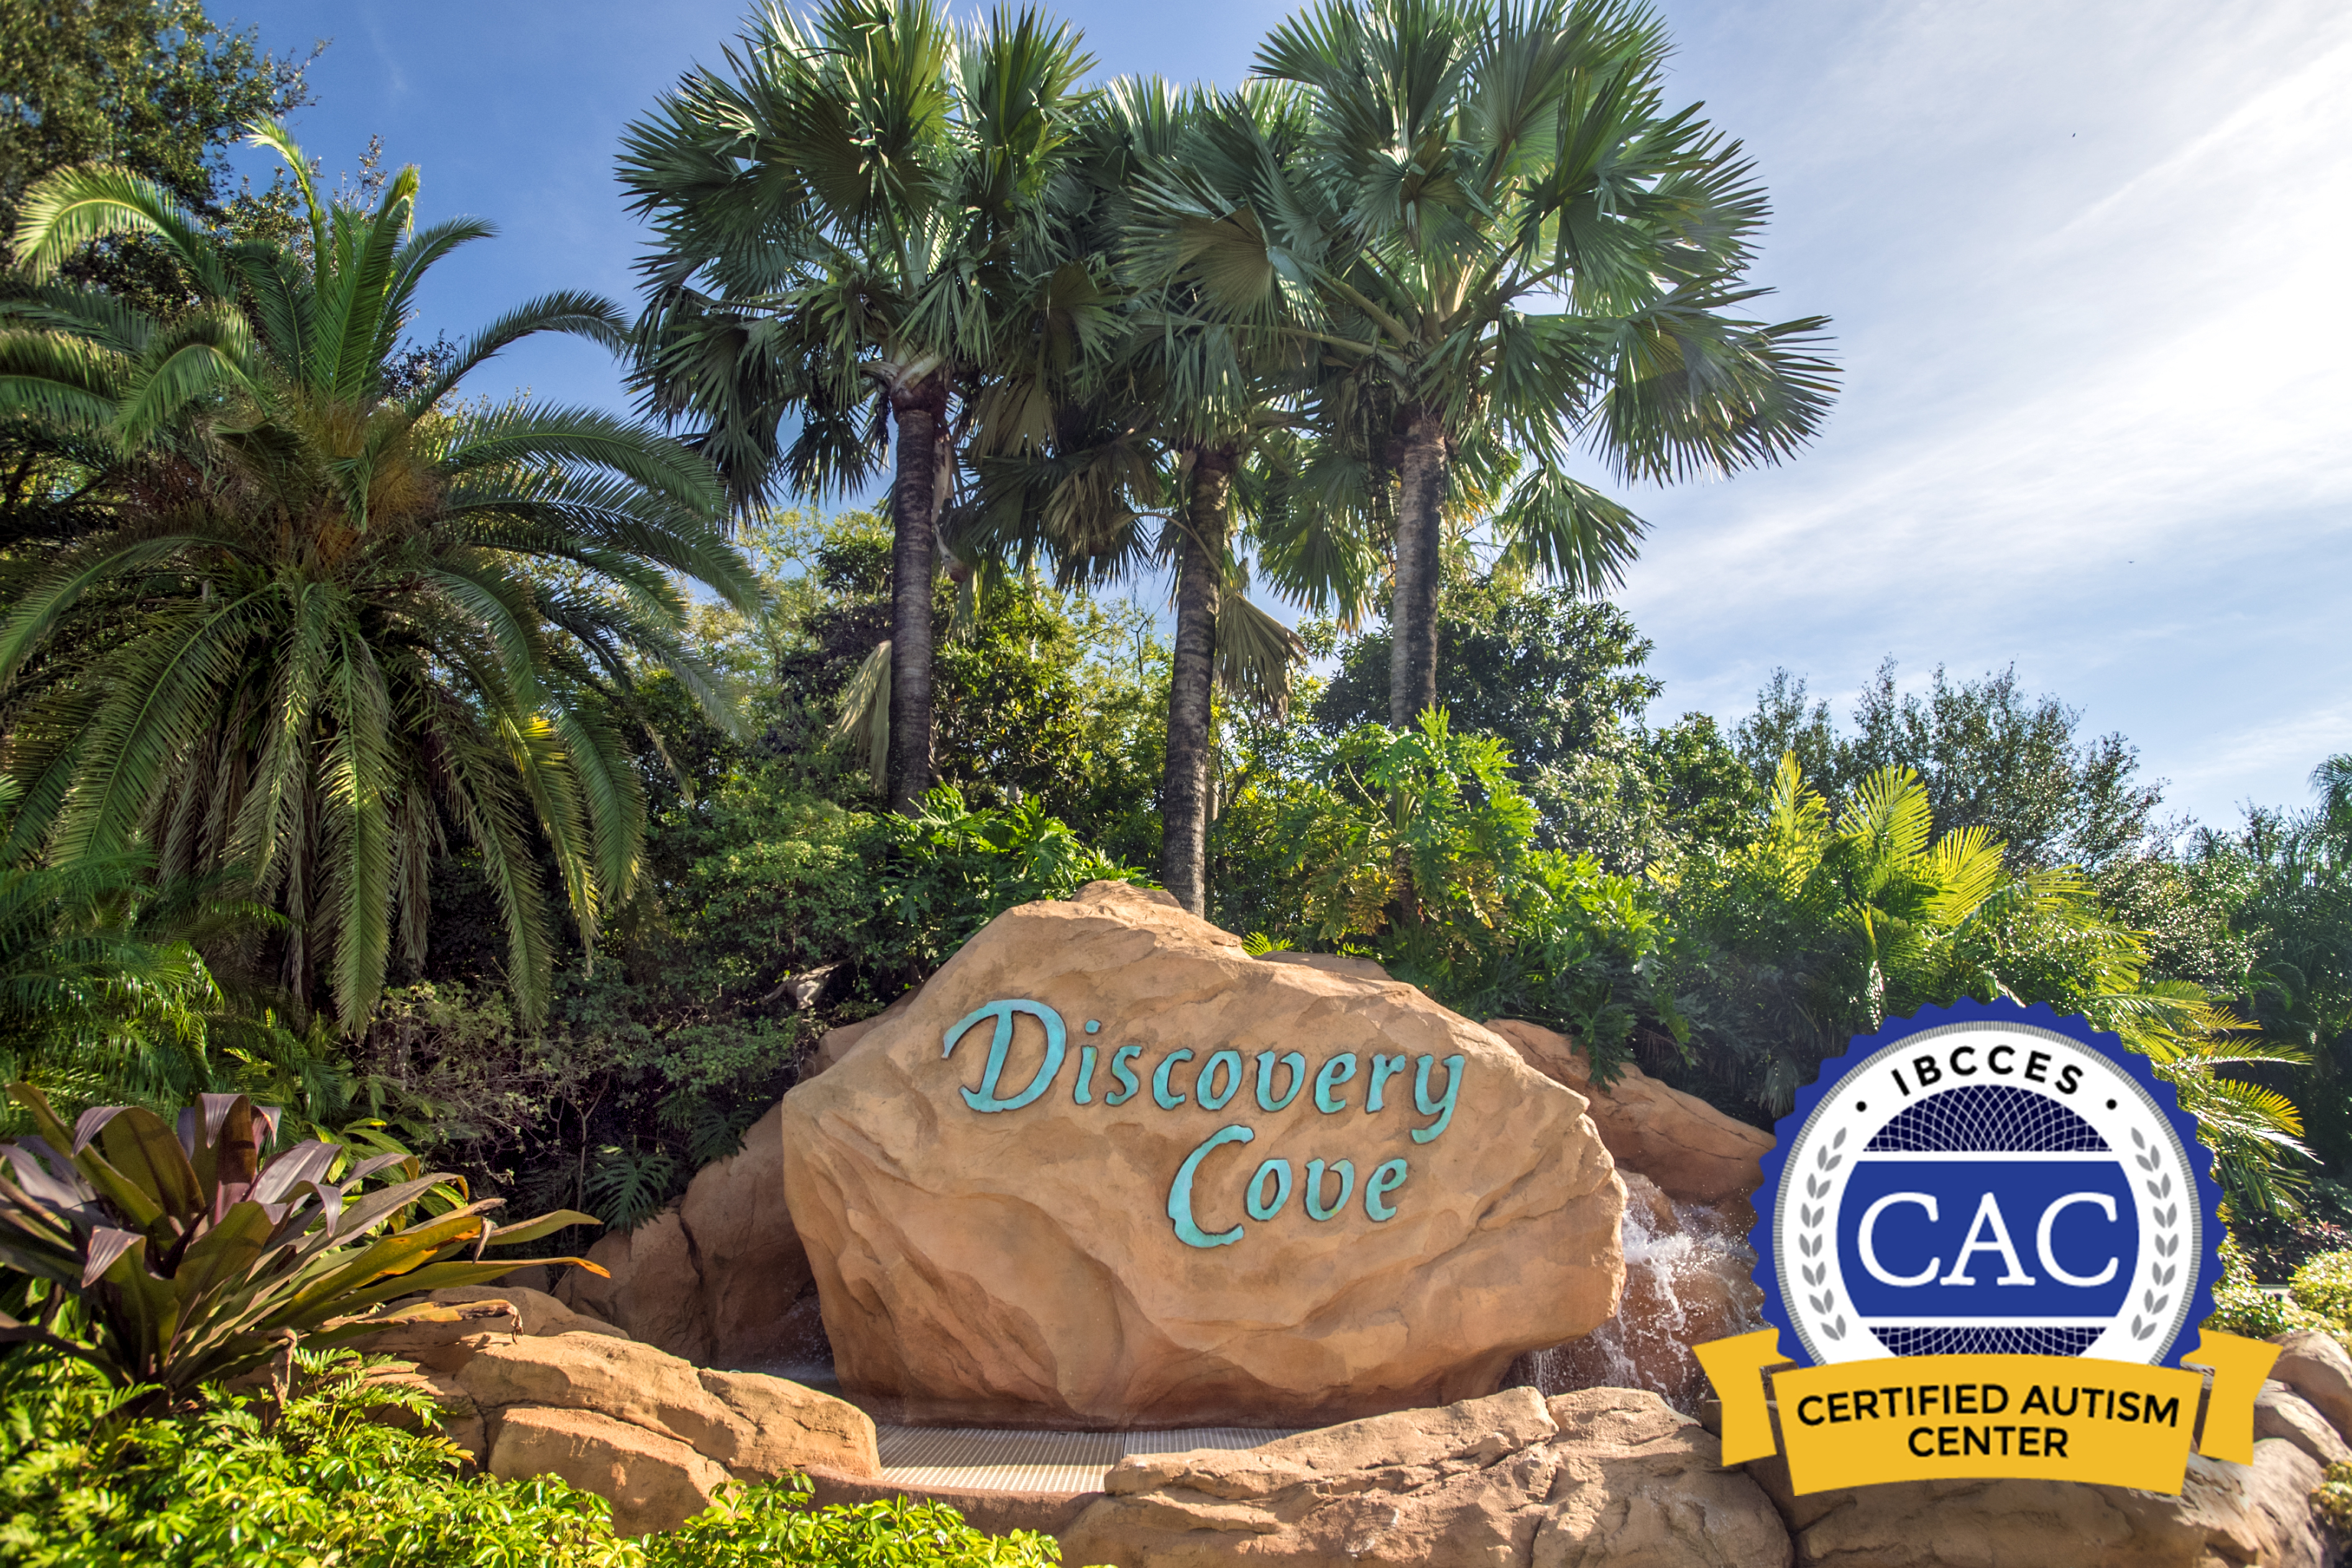 Discovery Cove - Certified Autism Center